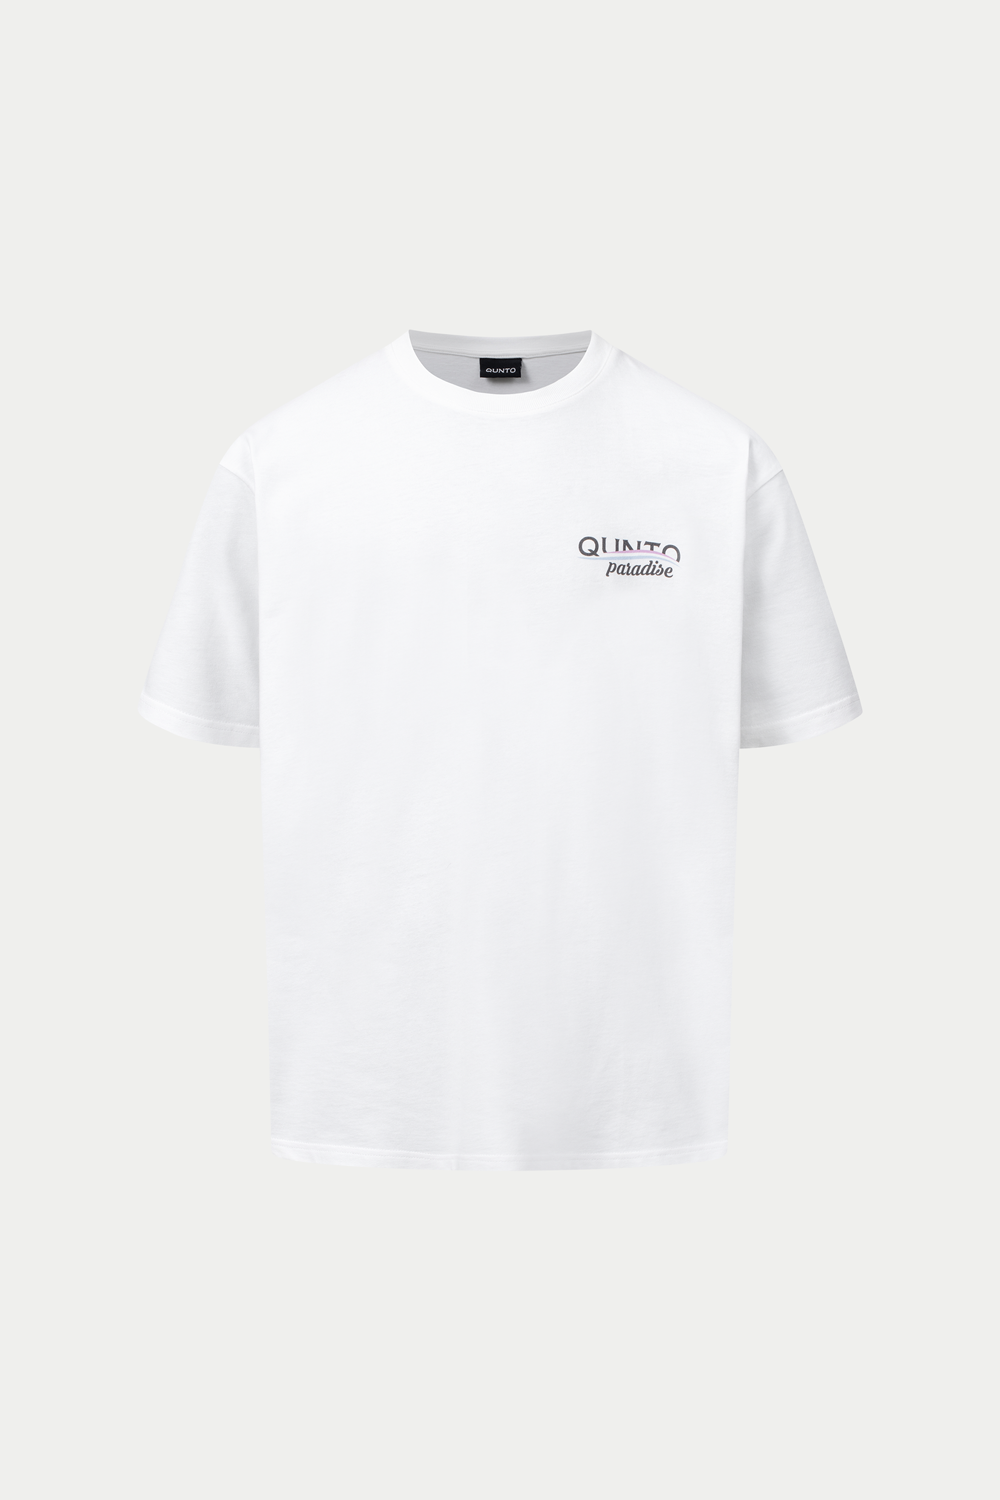 SPEED BOAT WHITE T